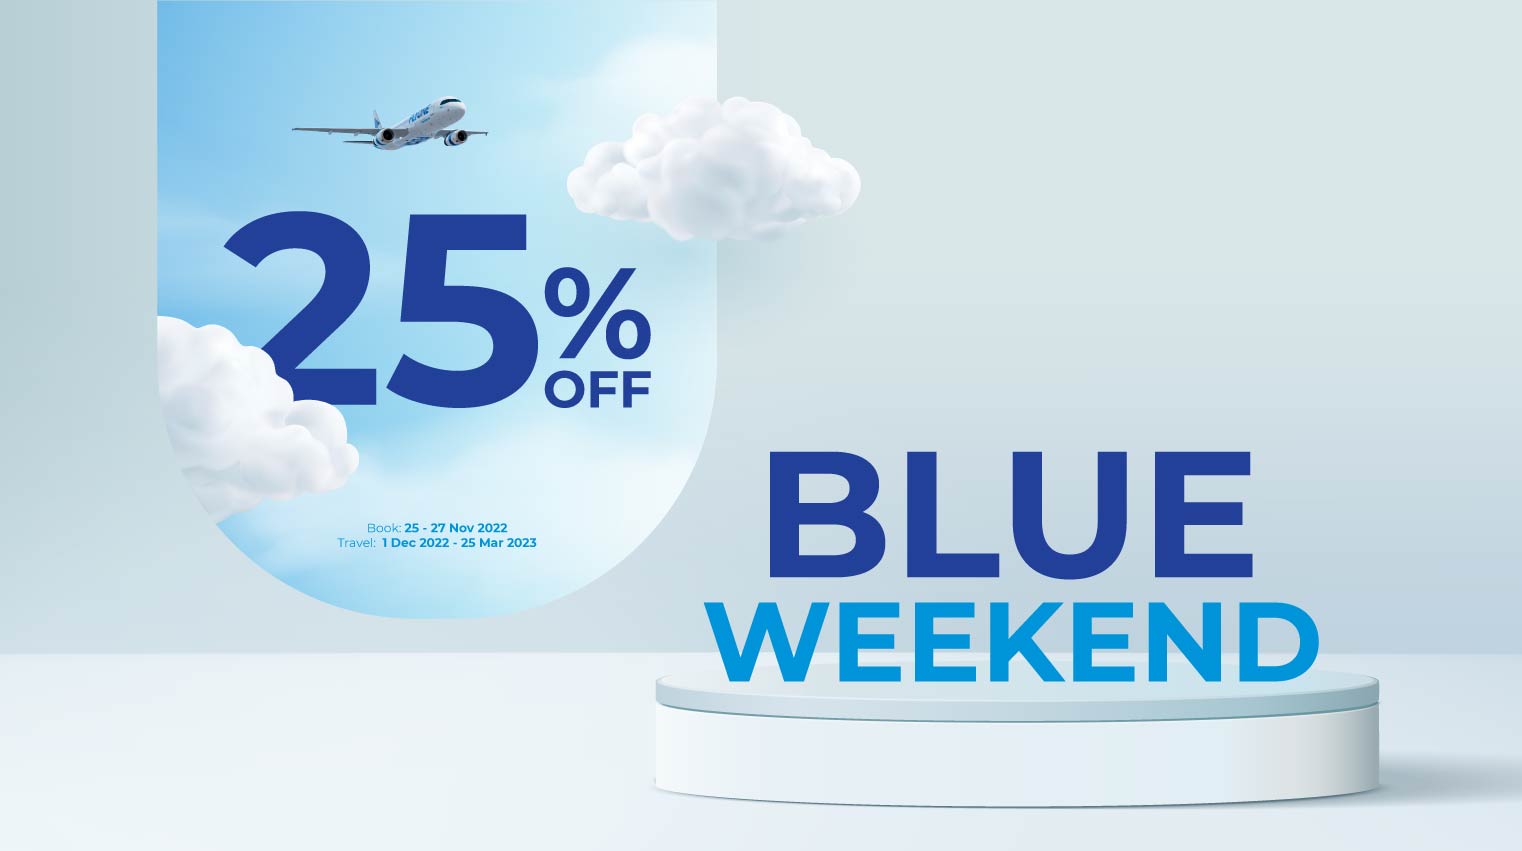 25% OFF for Blue Weekend!